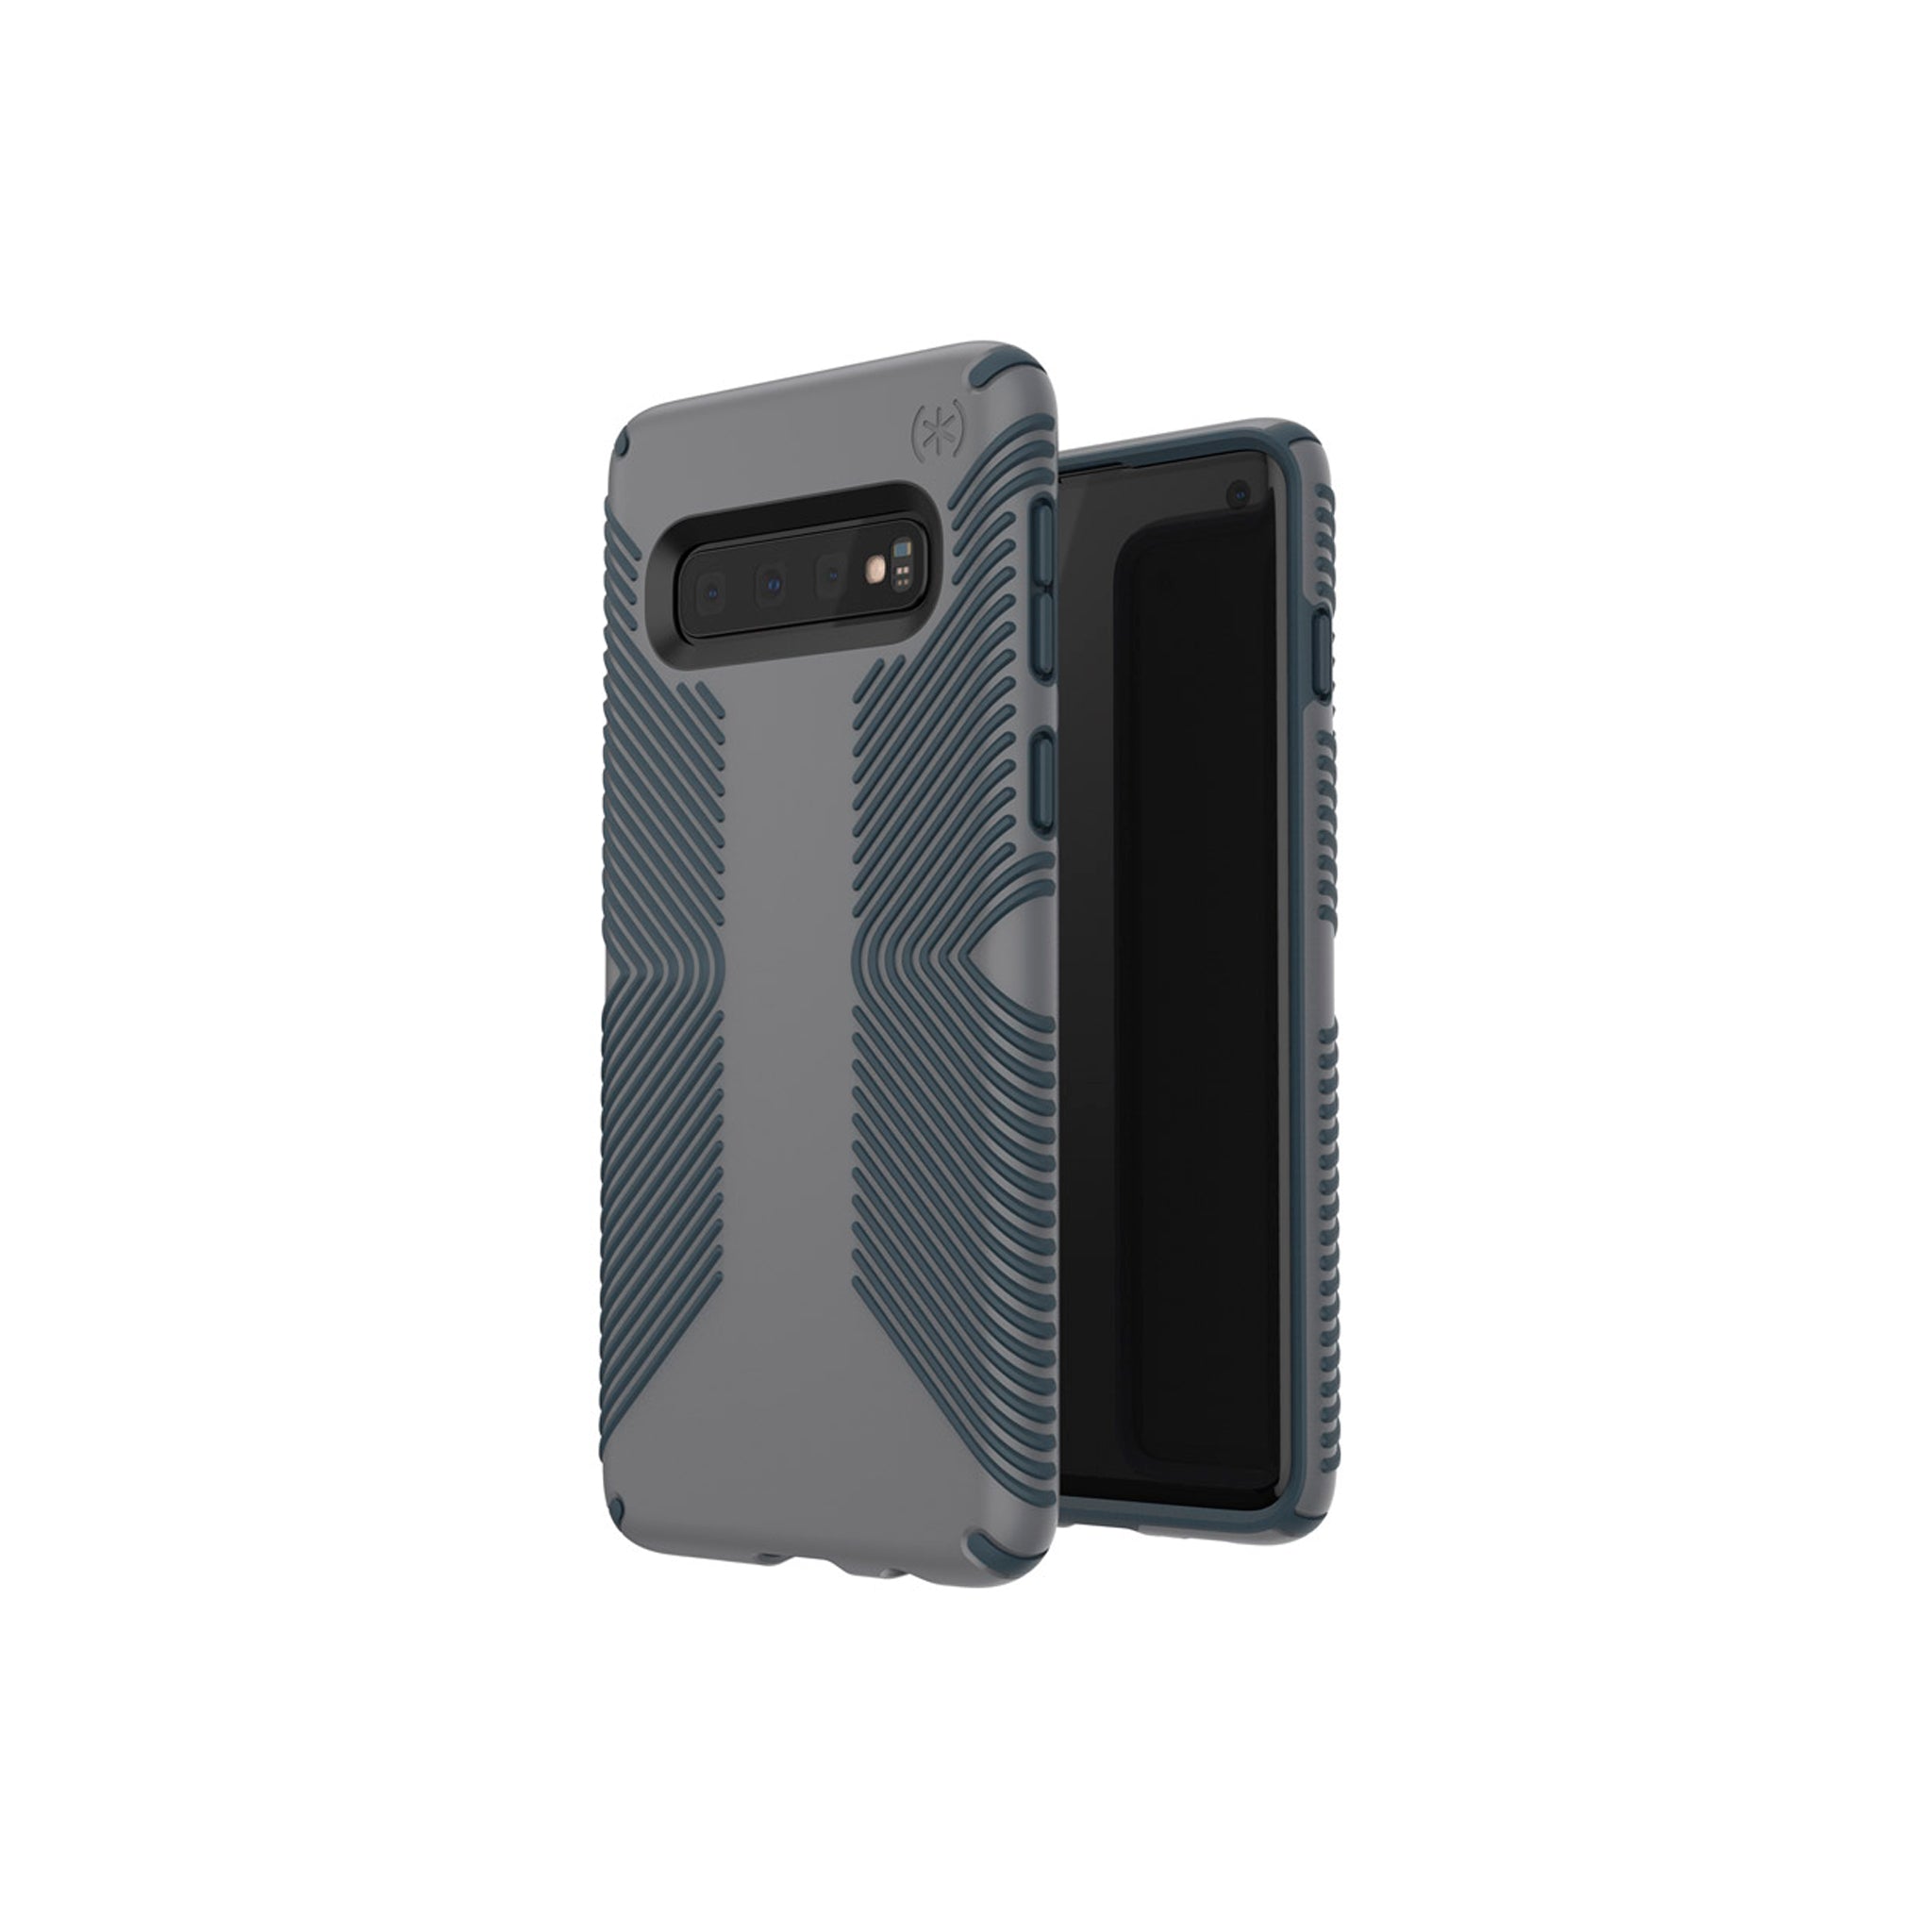 Speck - Presidio Grip Case For Samsung Galaxy S10 - Graphite Gray And Charcoal Gray